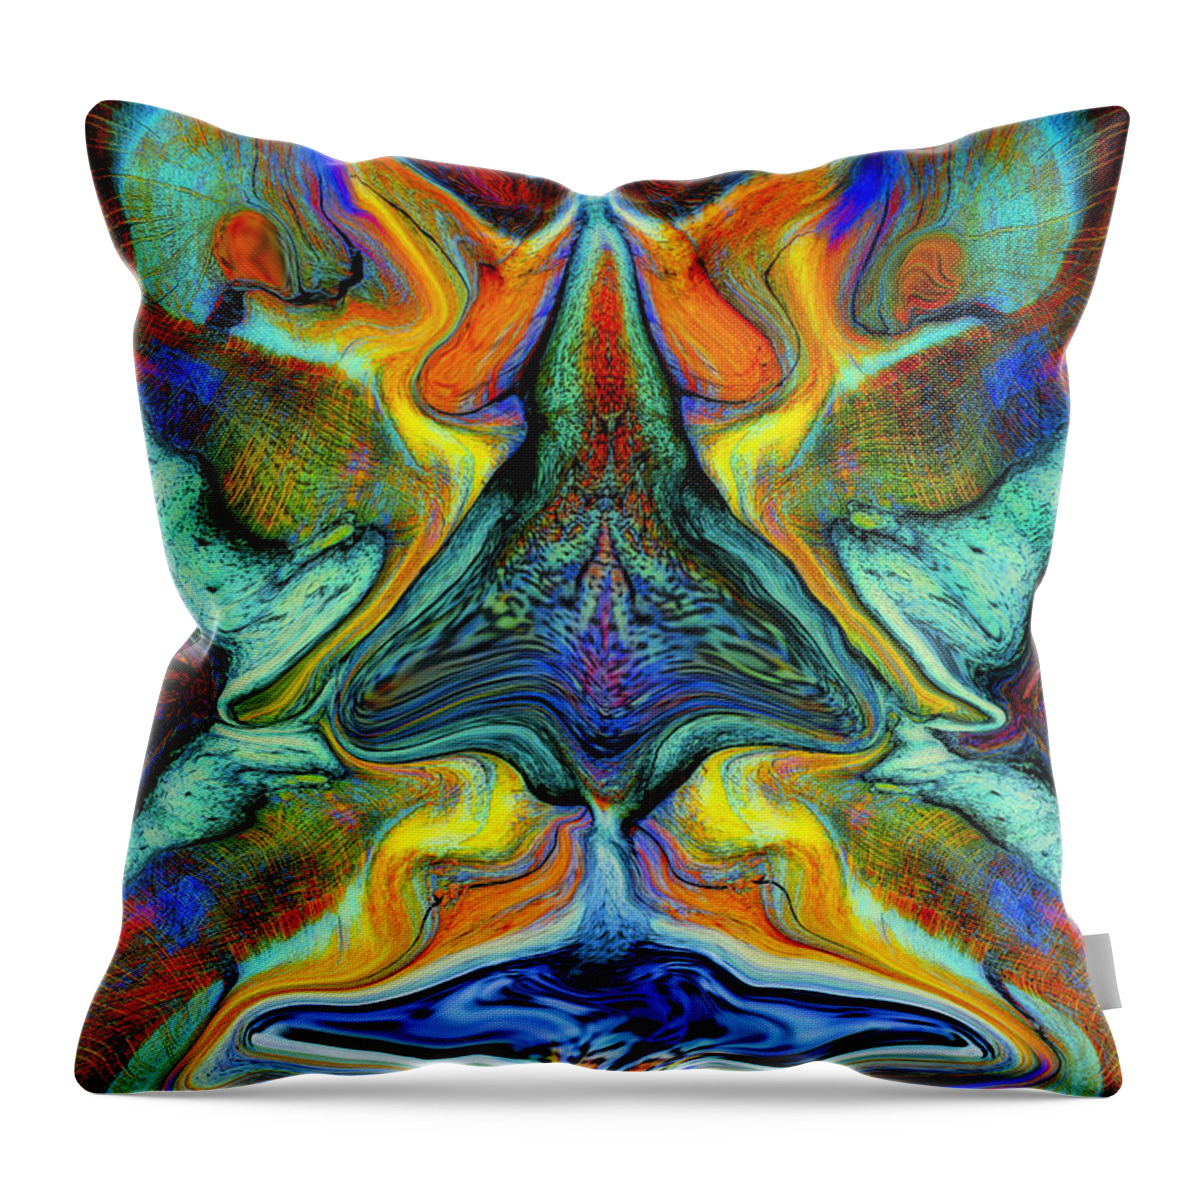 Fantasy Throw Pillow featuring the digital art Wild Thing by Stephen Anderson